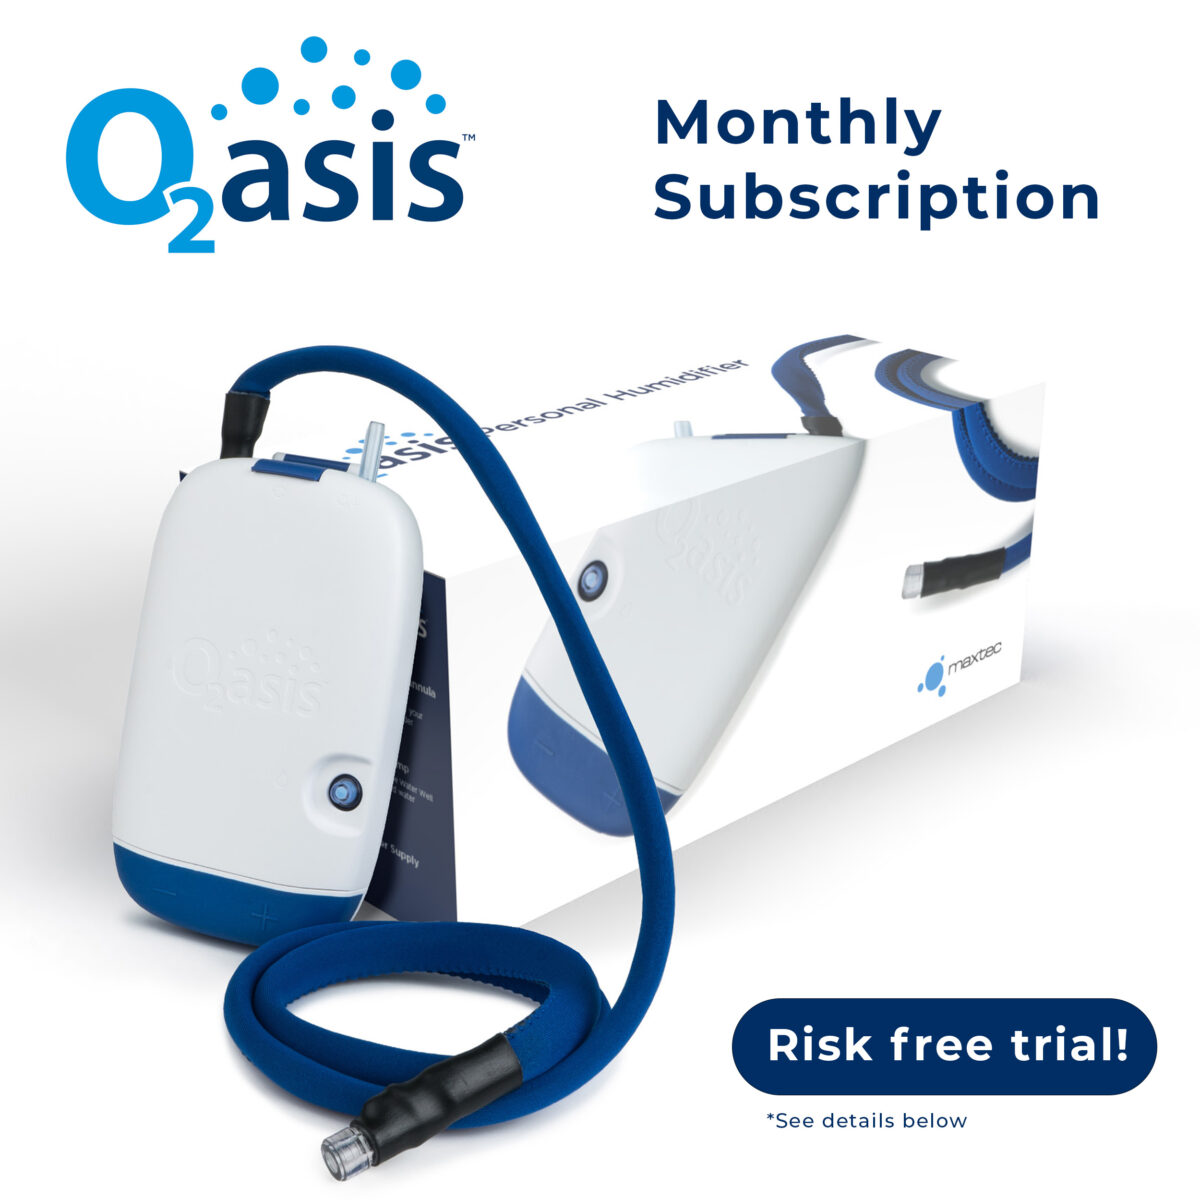 O2asis Monthly Subscription